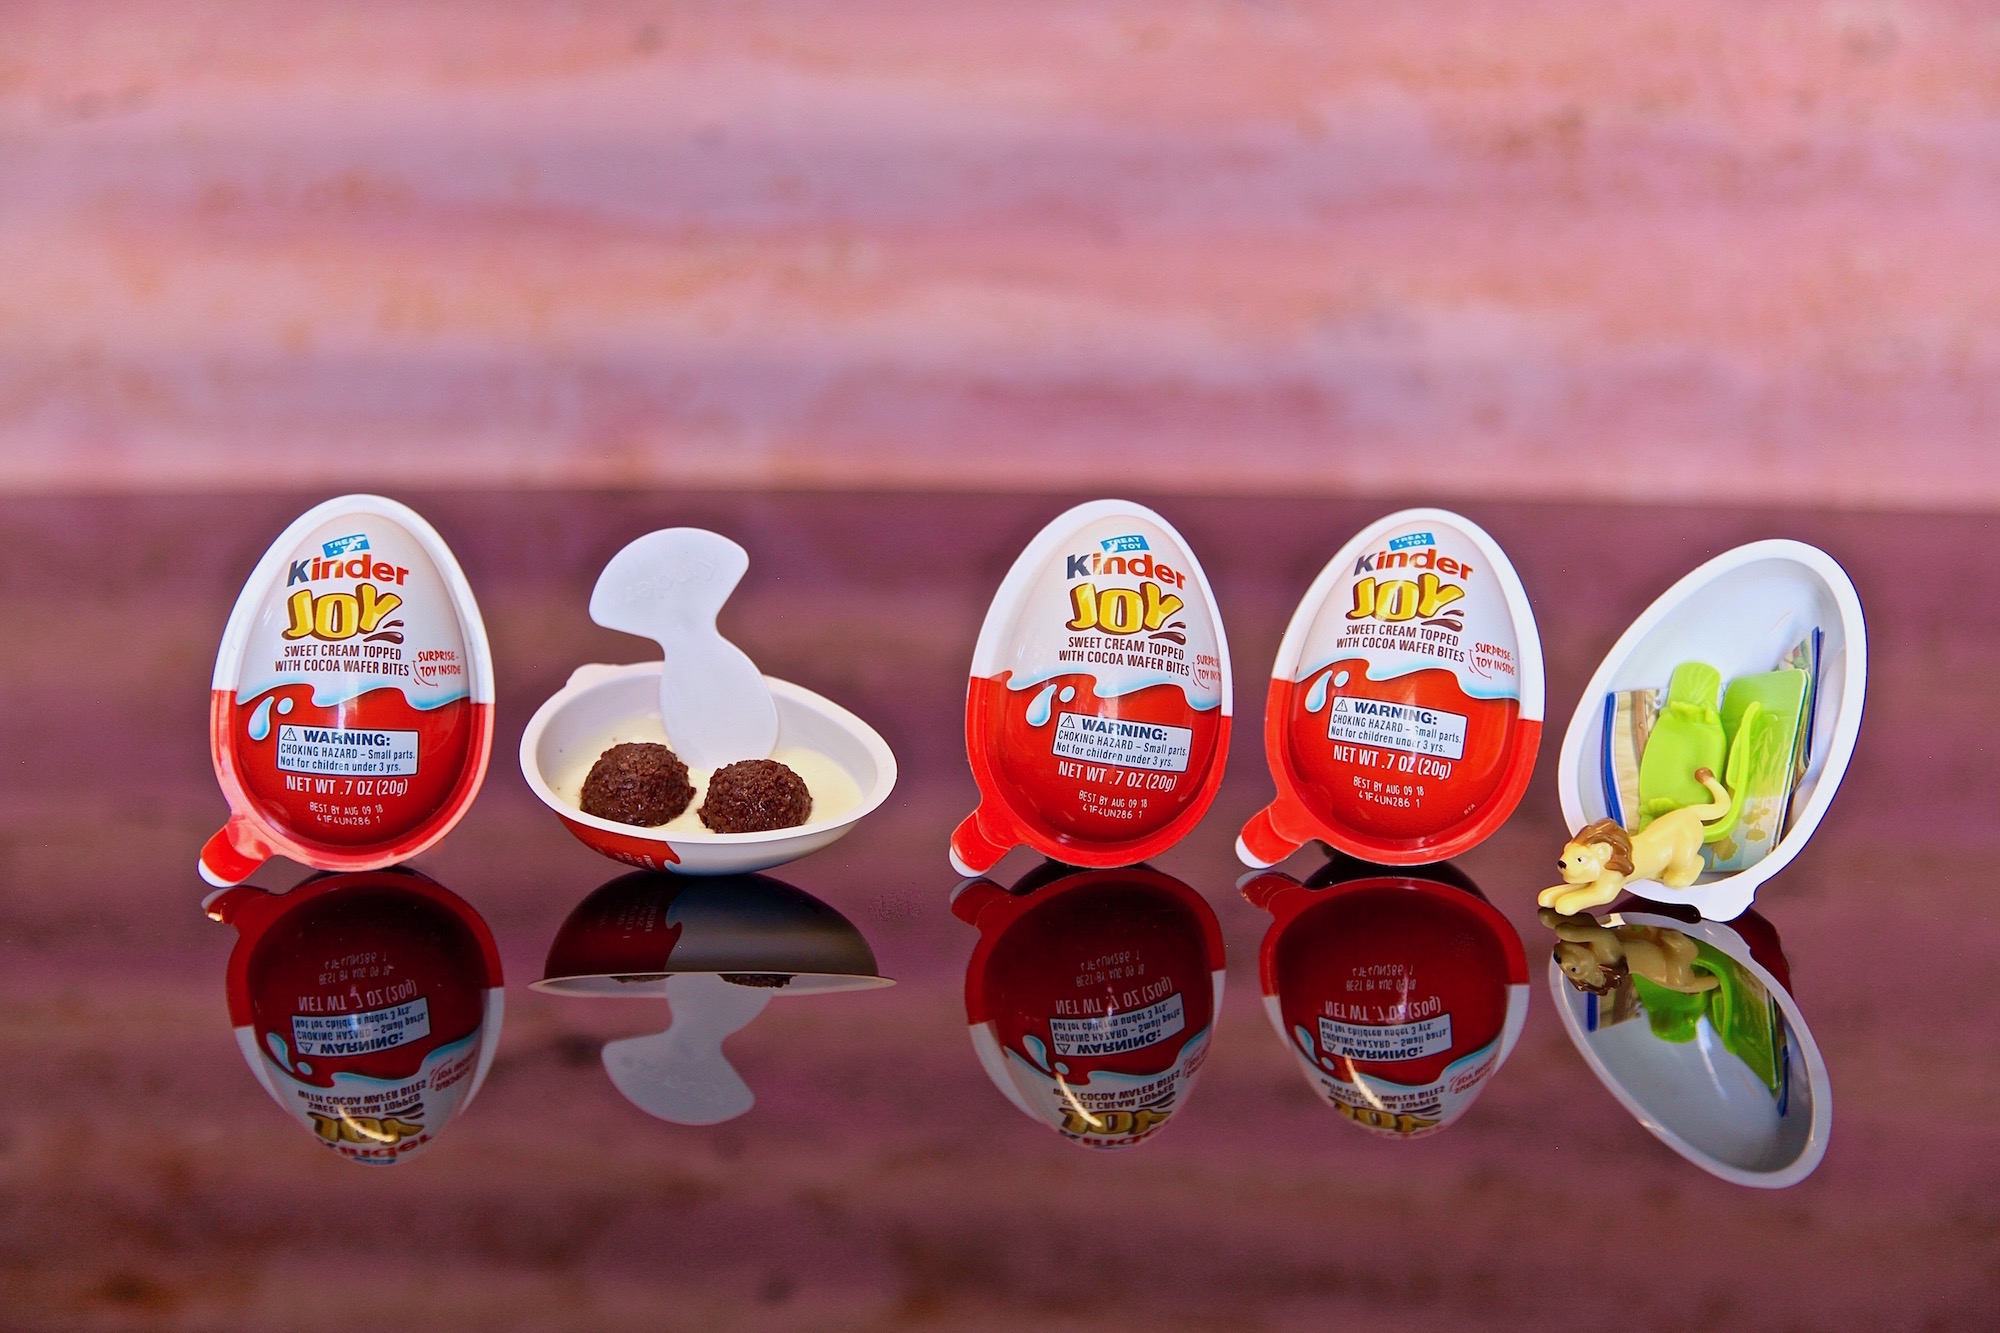 Kinder Joy Now Available Nationwide In USA!